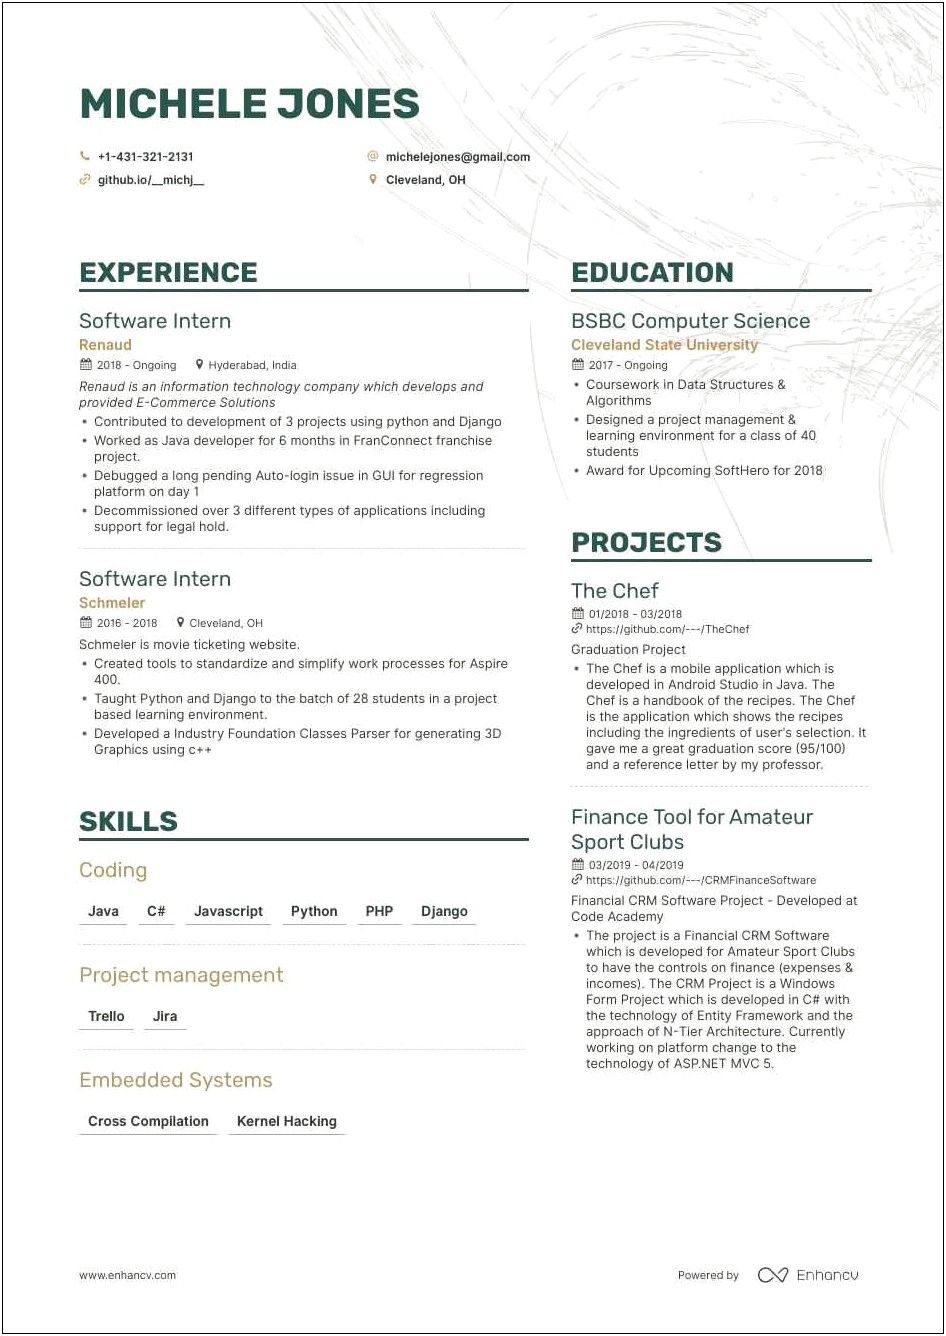 6 Months Experience Resume Sample In Testing